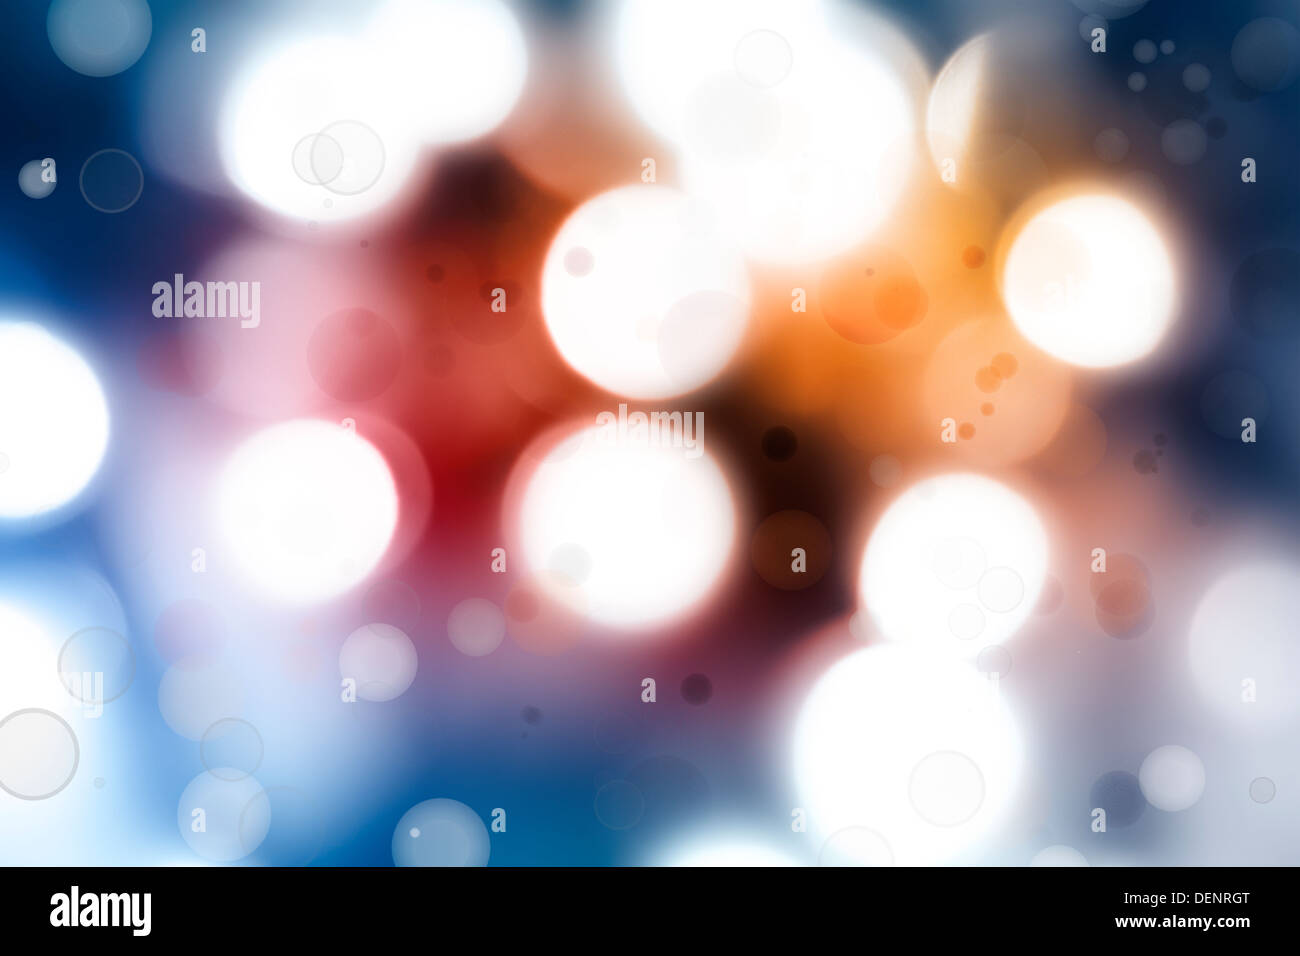 Bright circles of light abstract background Stock Photo